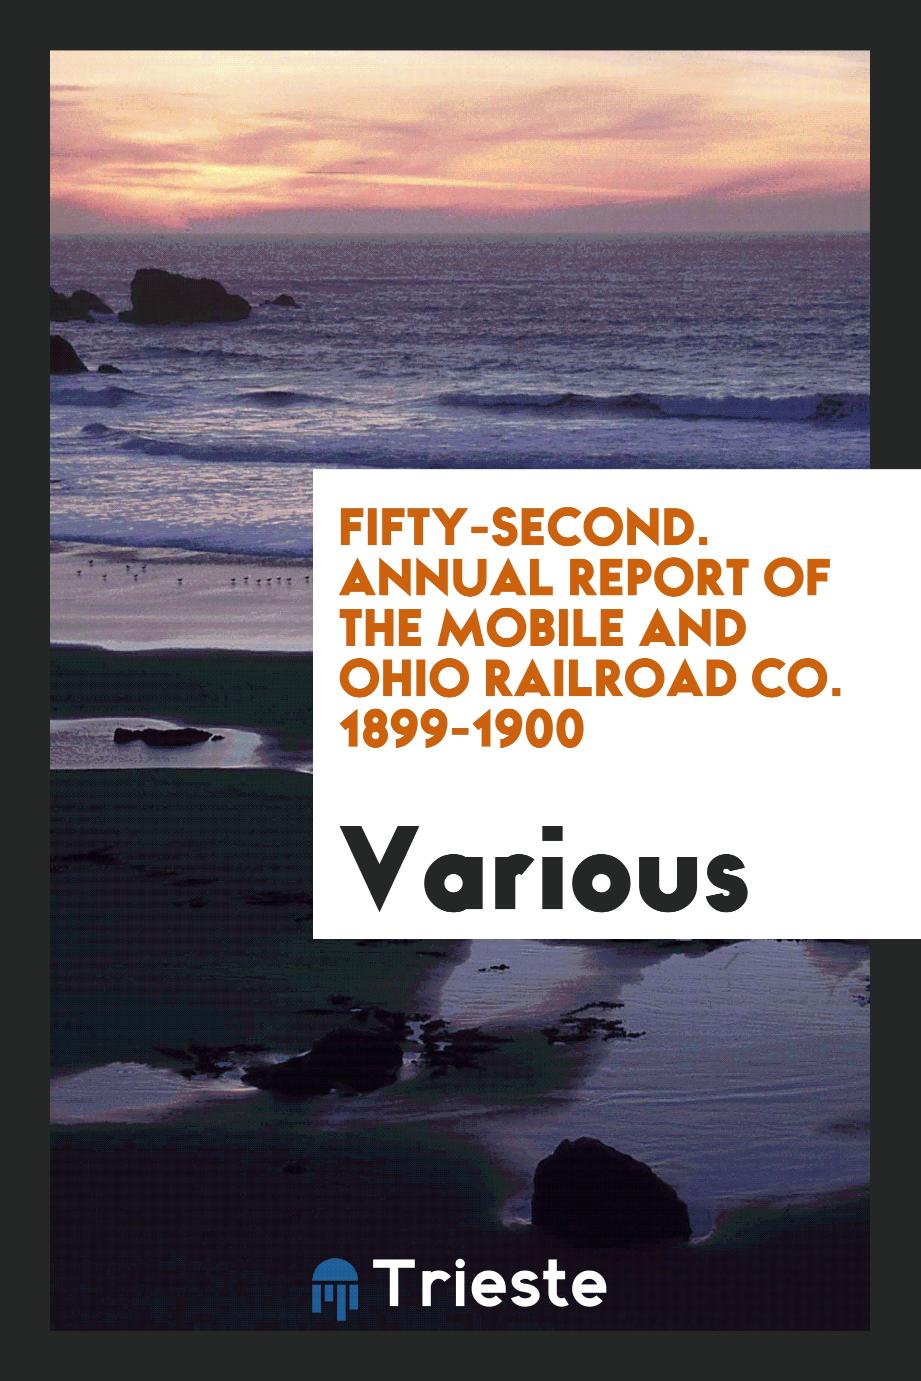 Fifty-second. Annual Report of the Mobile and Ohio Railroad Co. 1899-1900